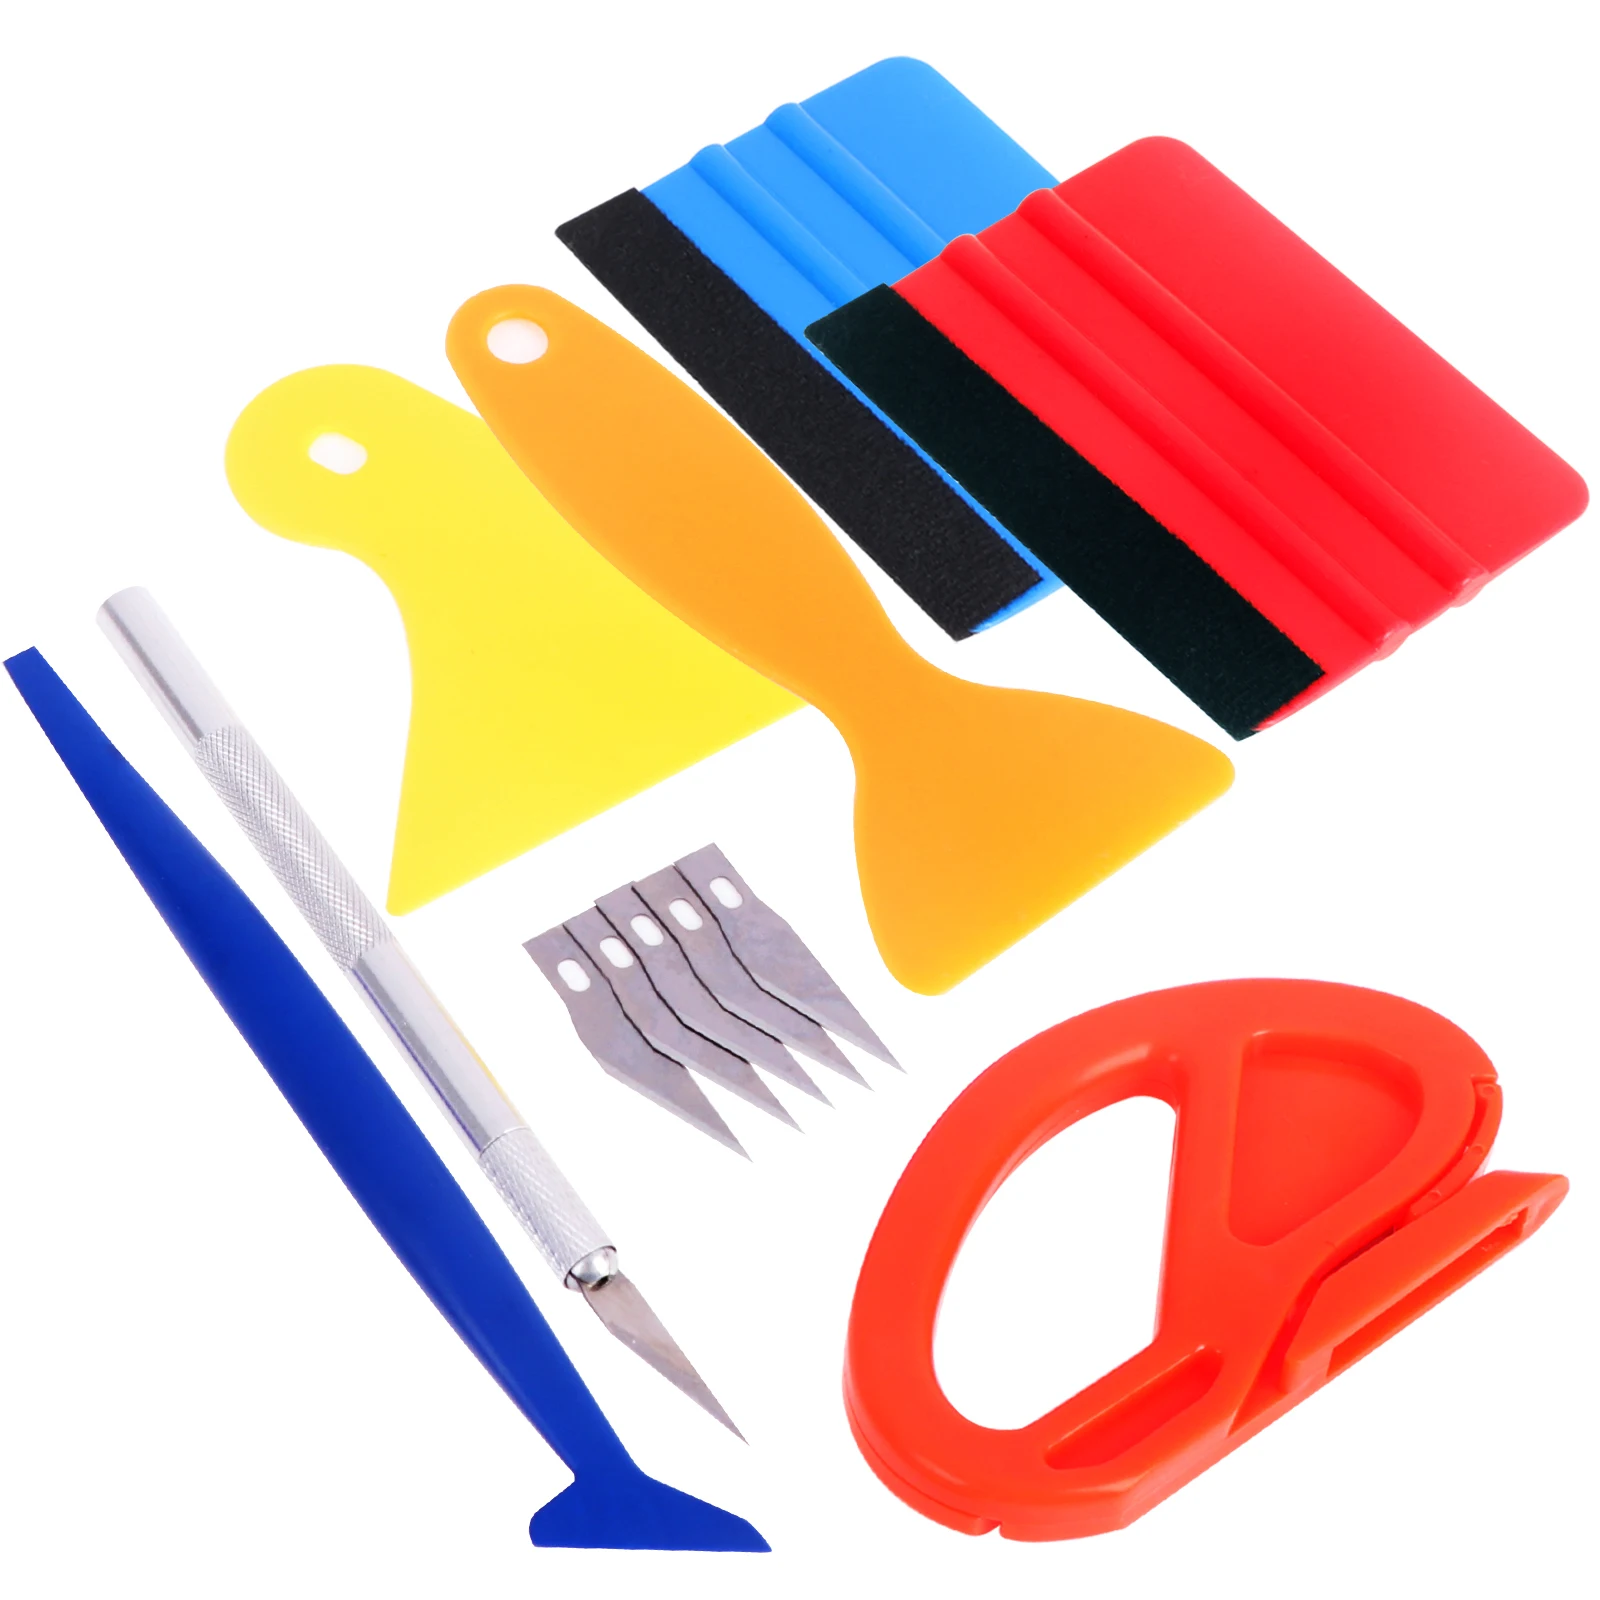 

12PCS Small Scraper For Car Window Film Car Vinyl Wrap Tool Kit Glass Cleaning Can Be Used For Mobile Phone Film Car Accessories